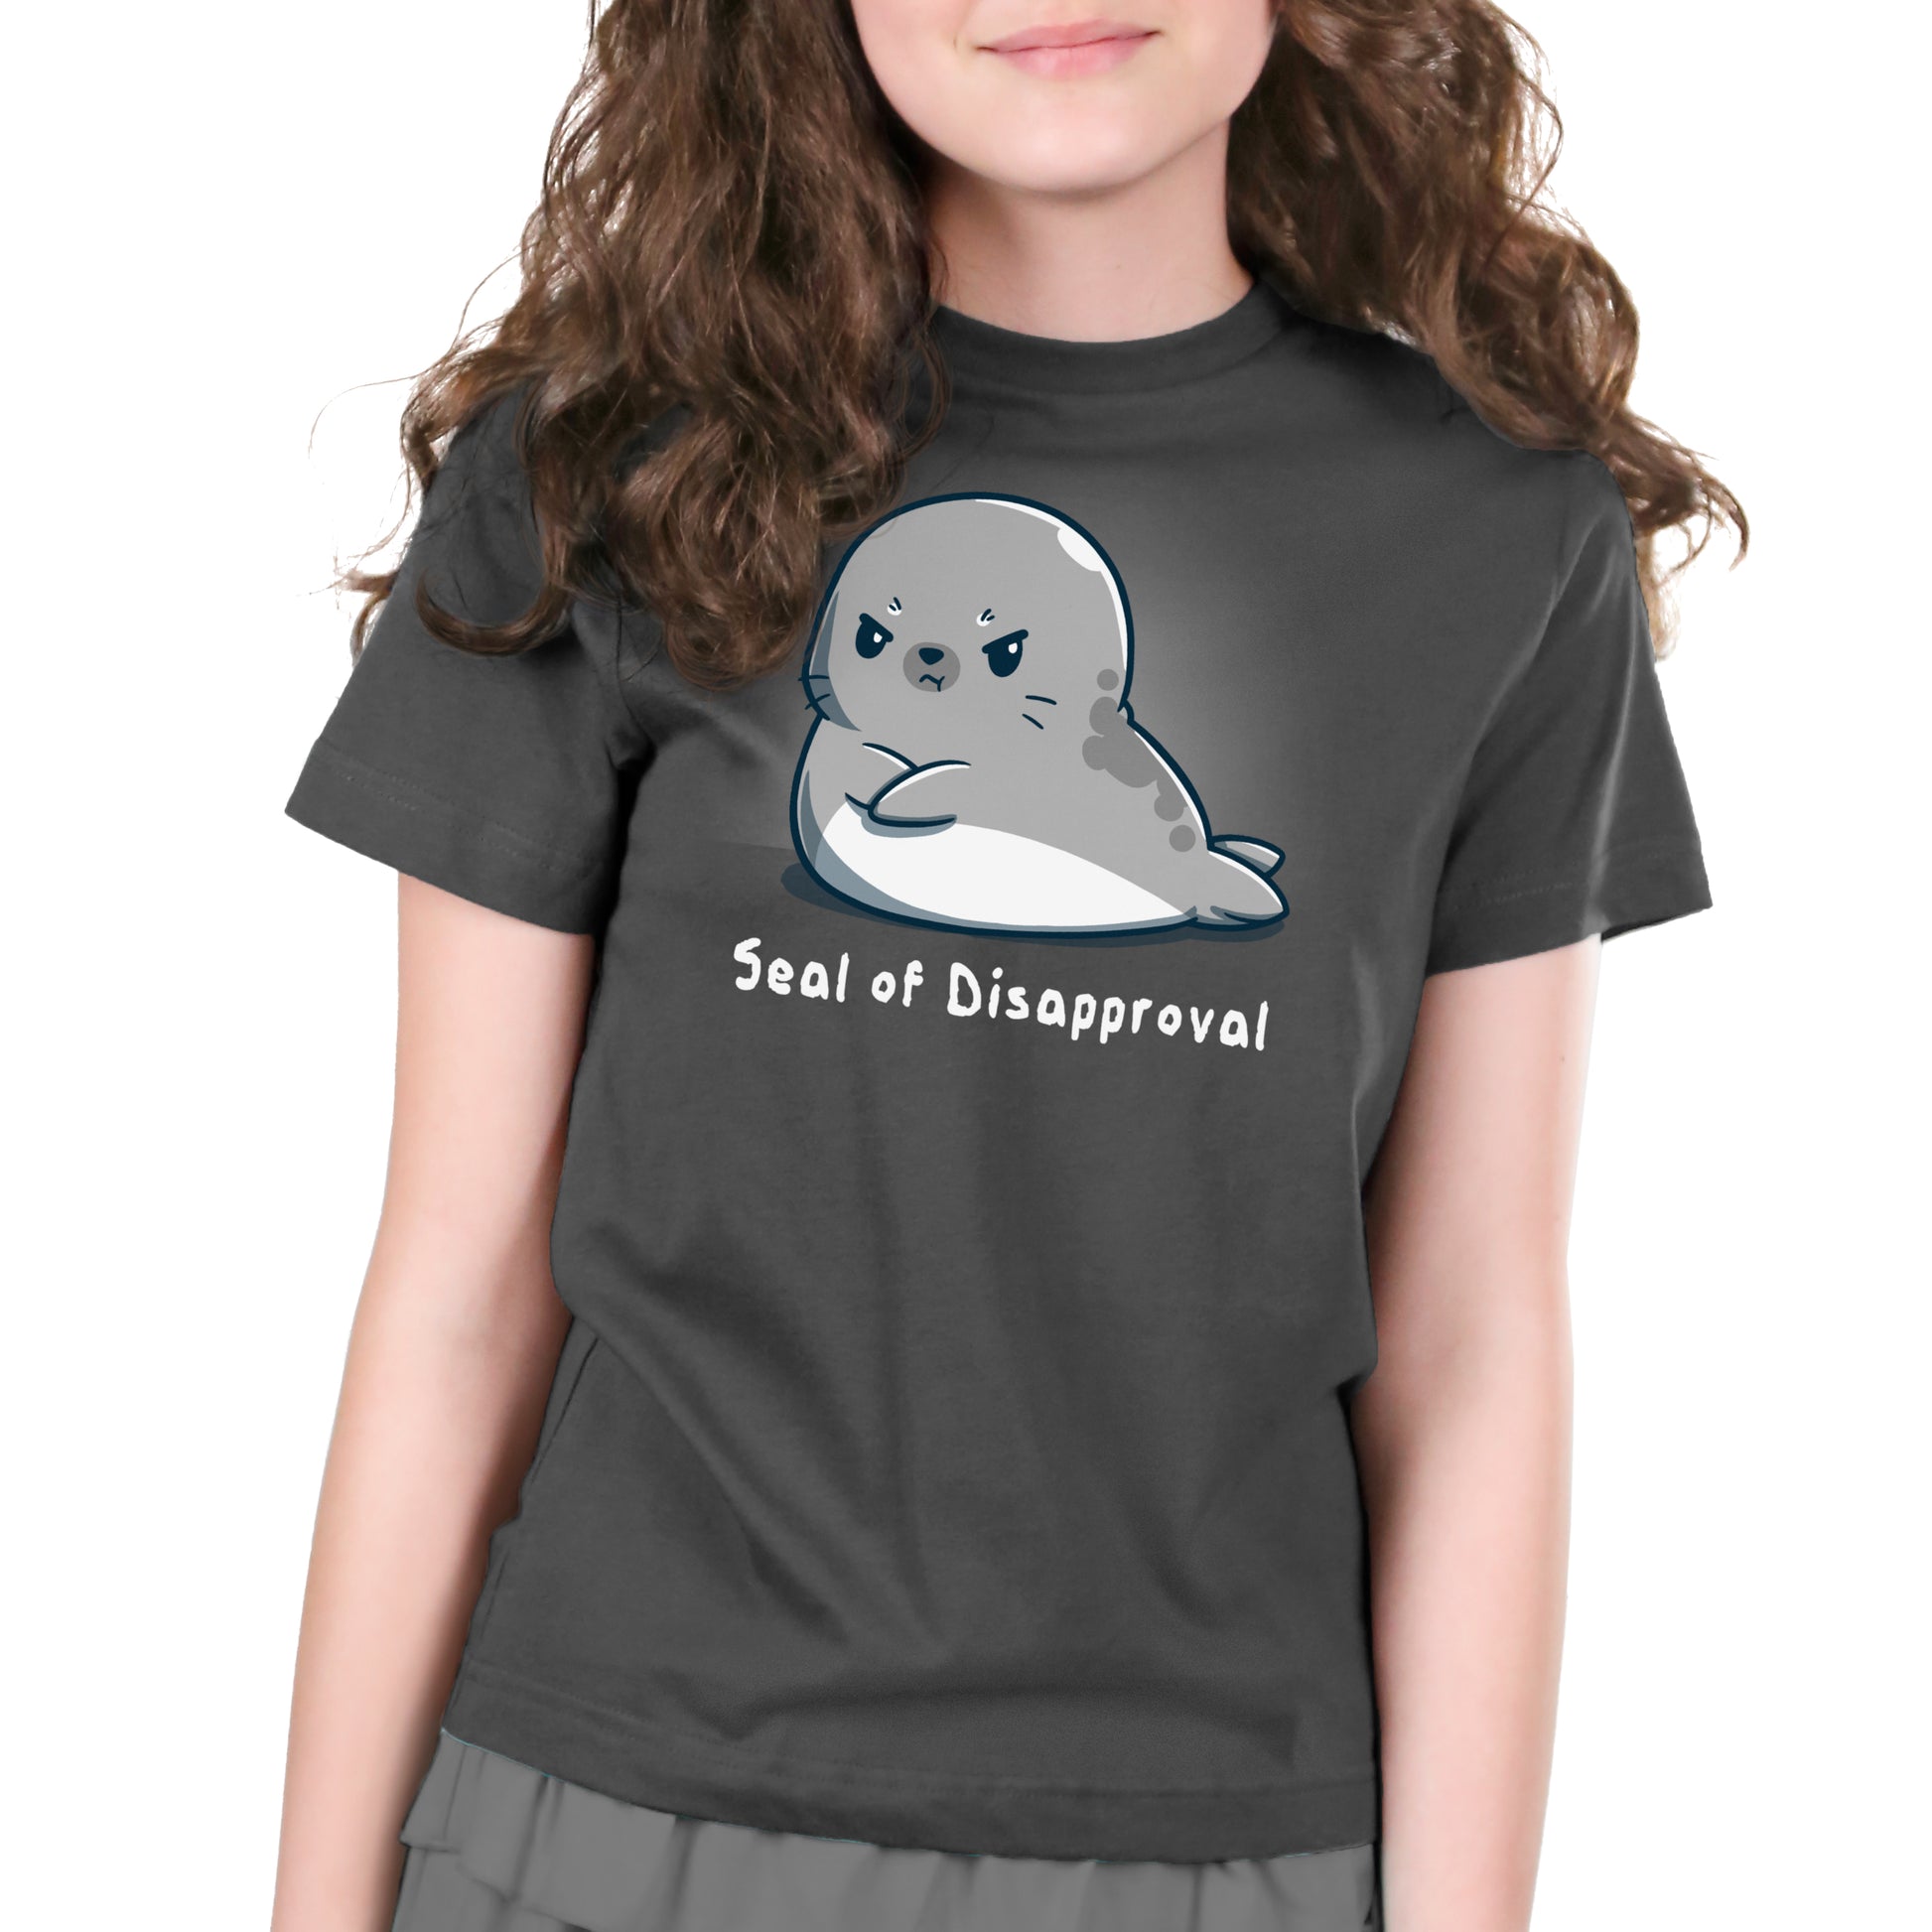 A disapproving girl wearing a TeeTurtle Seal of Disapproval charcoal gray t-shirt.